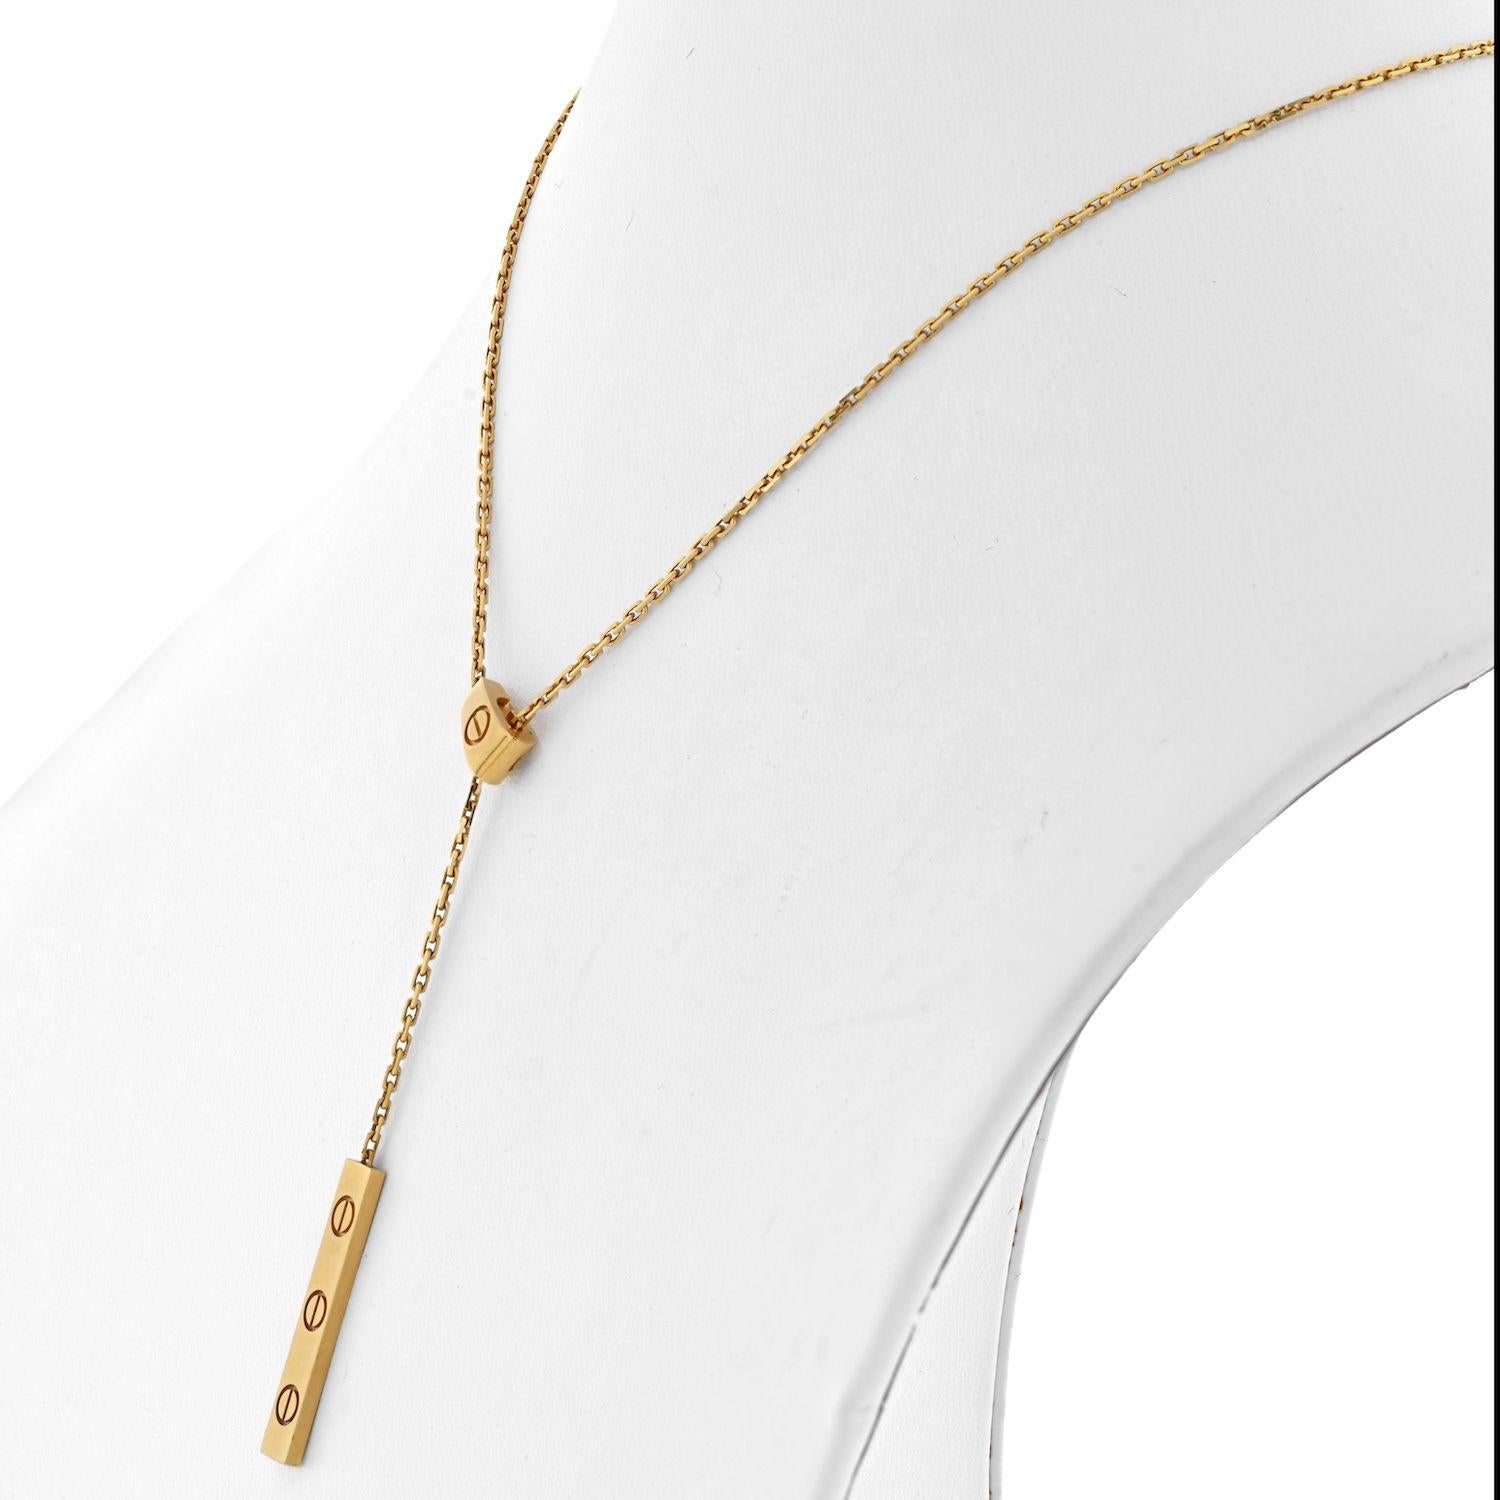 This sophisticated Cartier necklace from the LOVE collection is characterized by its high polished finish and its design. Inspired by cowboy tool, its bar pendant with screw motif dangles from the adjustable chain. Wear this fascinating piece of